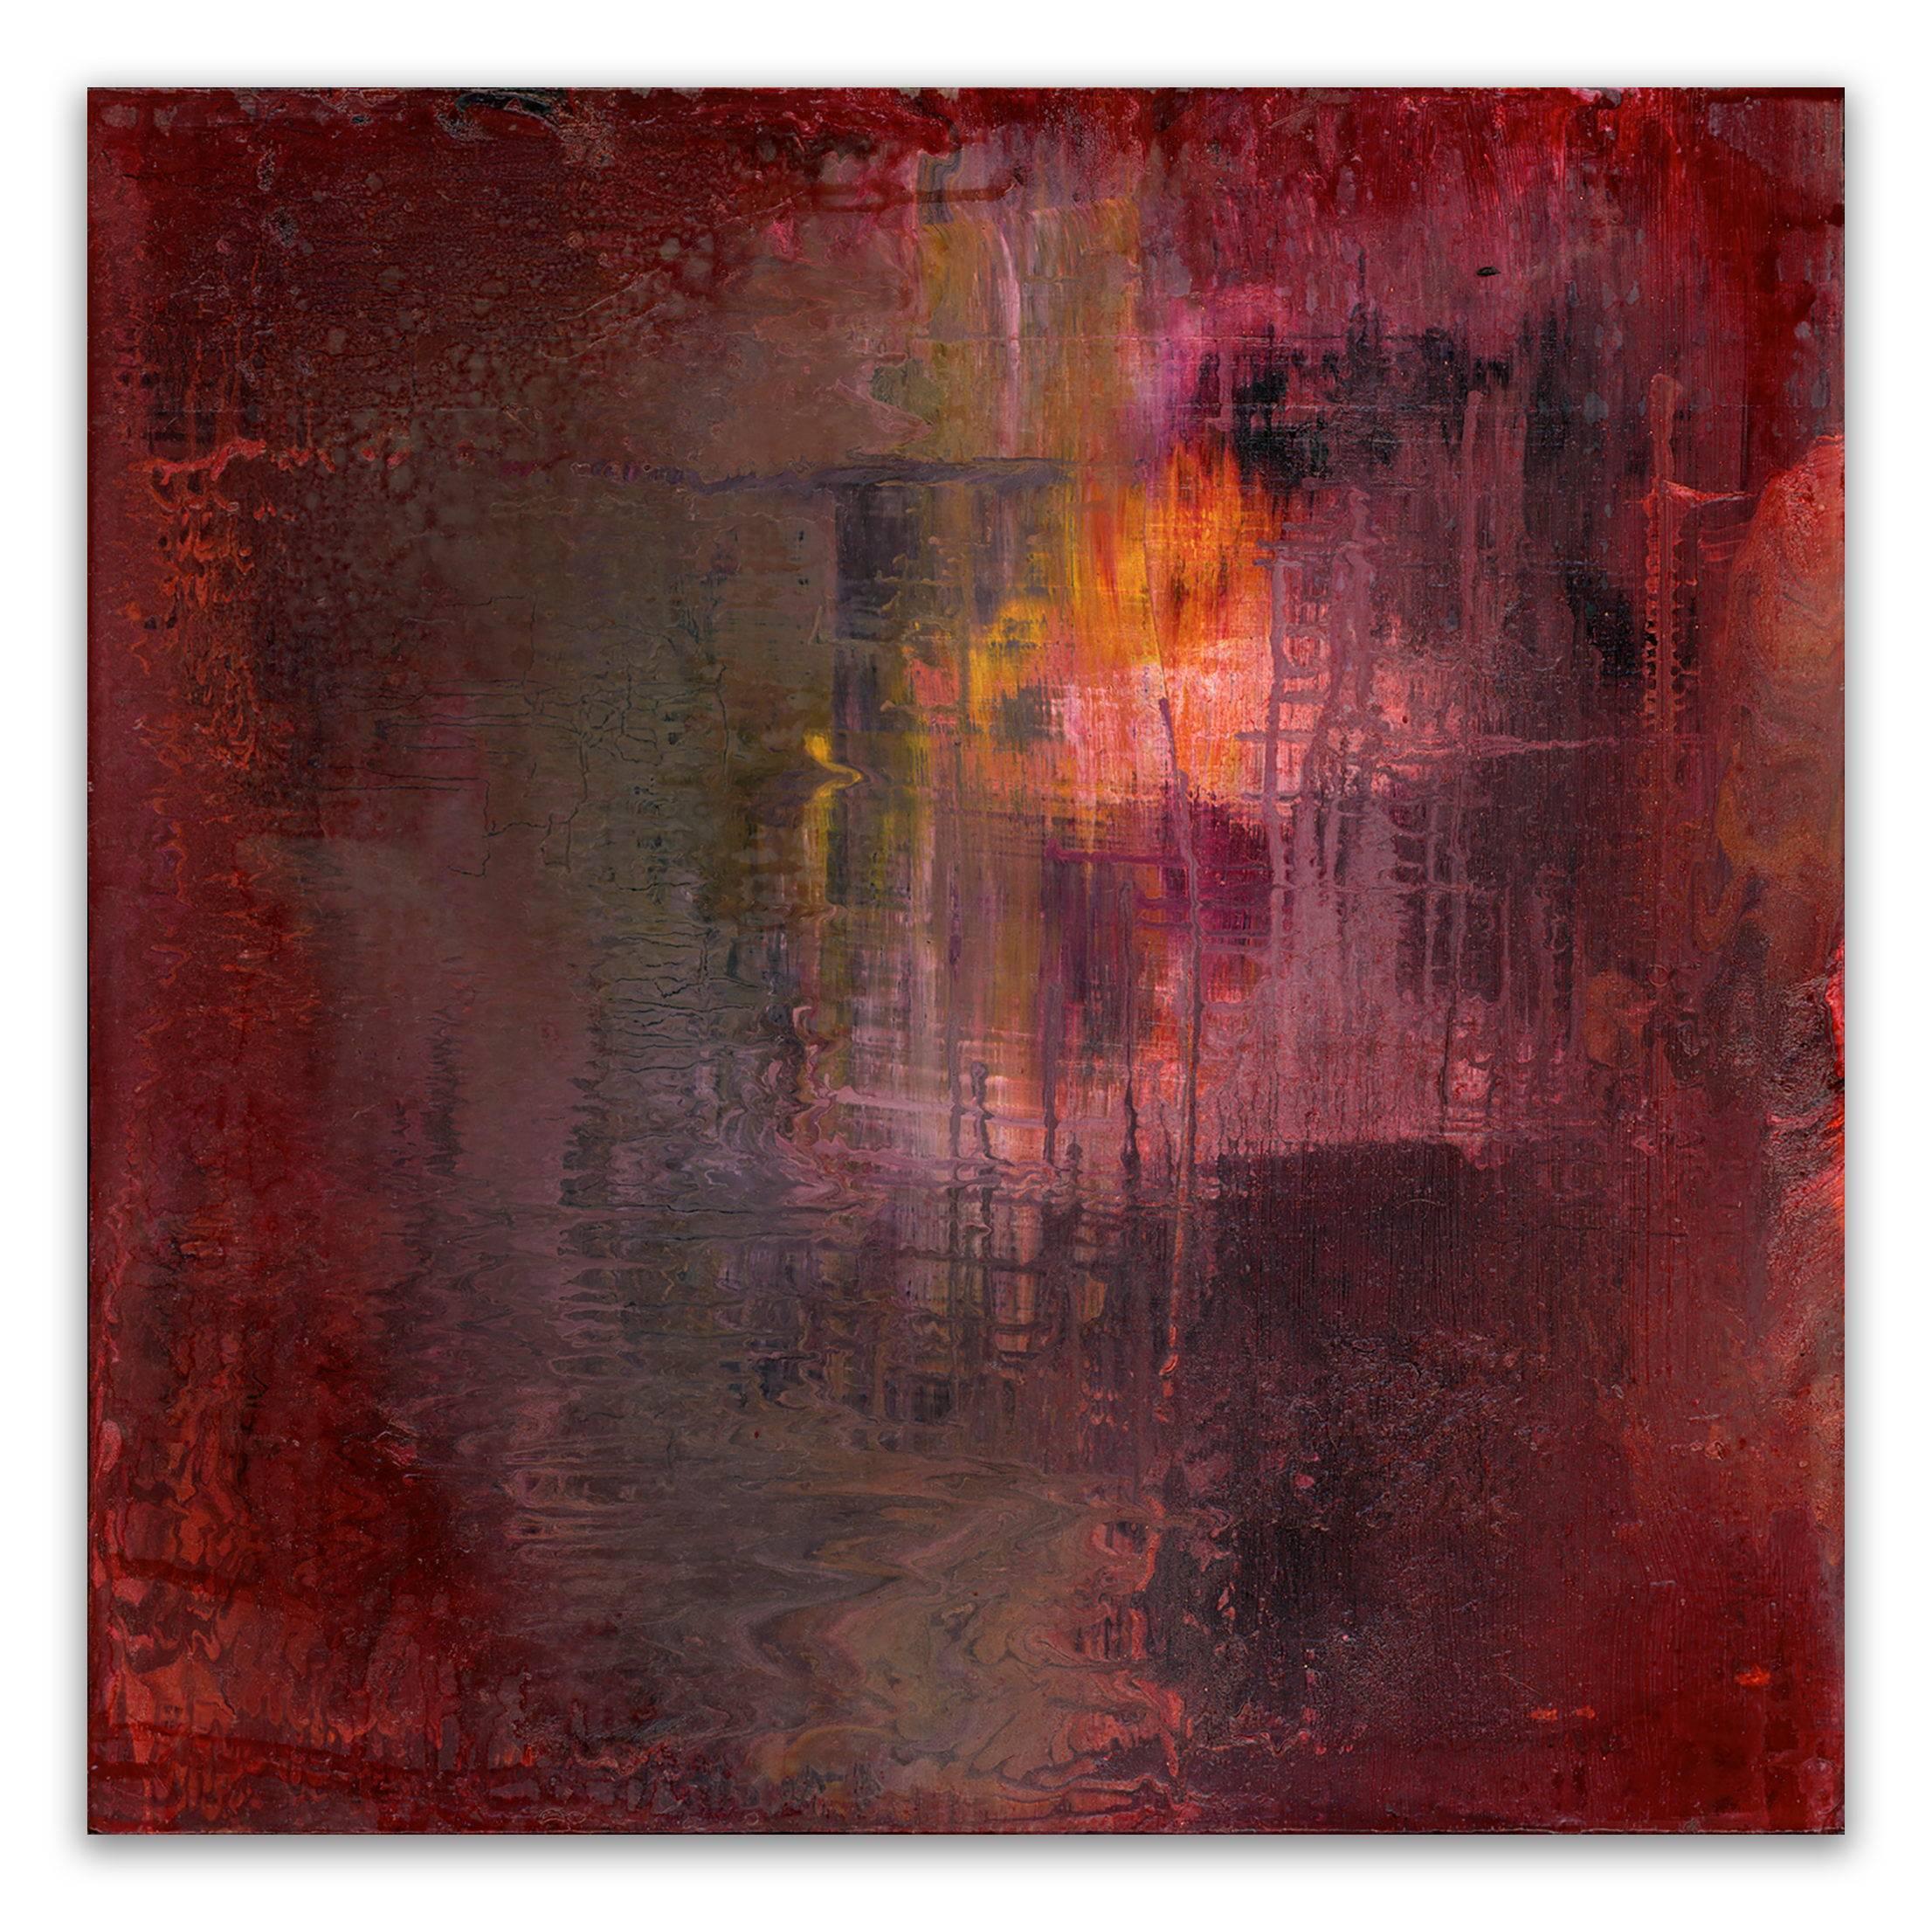 Fragments of poetry and silence no. 42 (Abstract Painting)